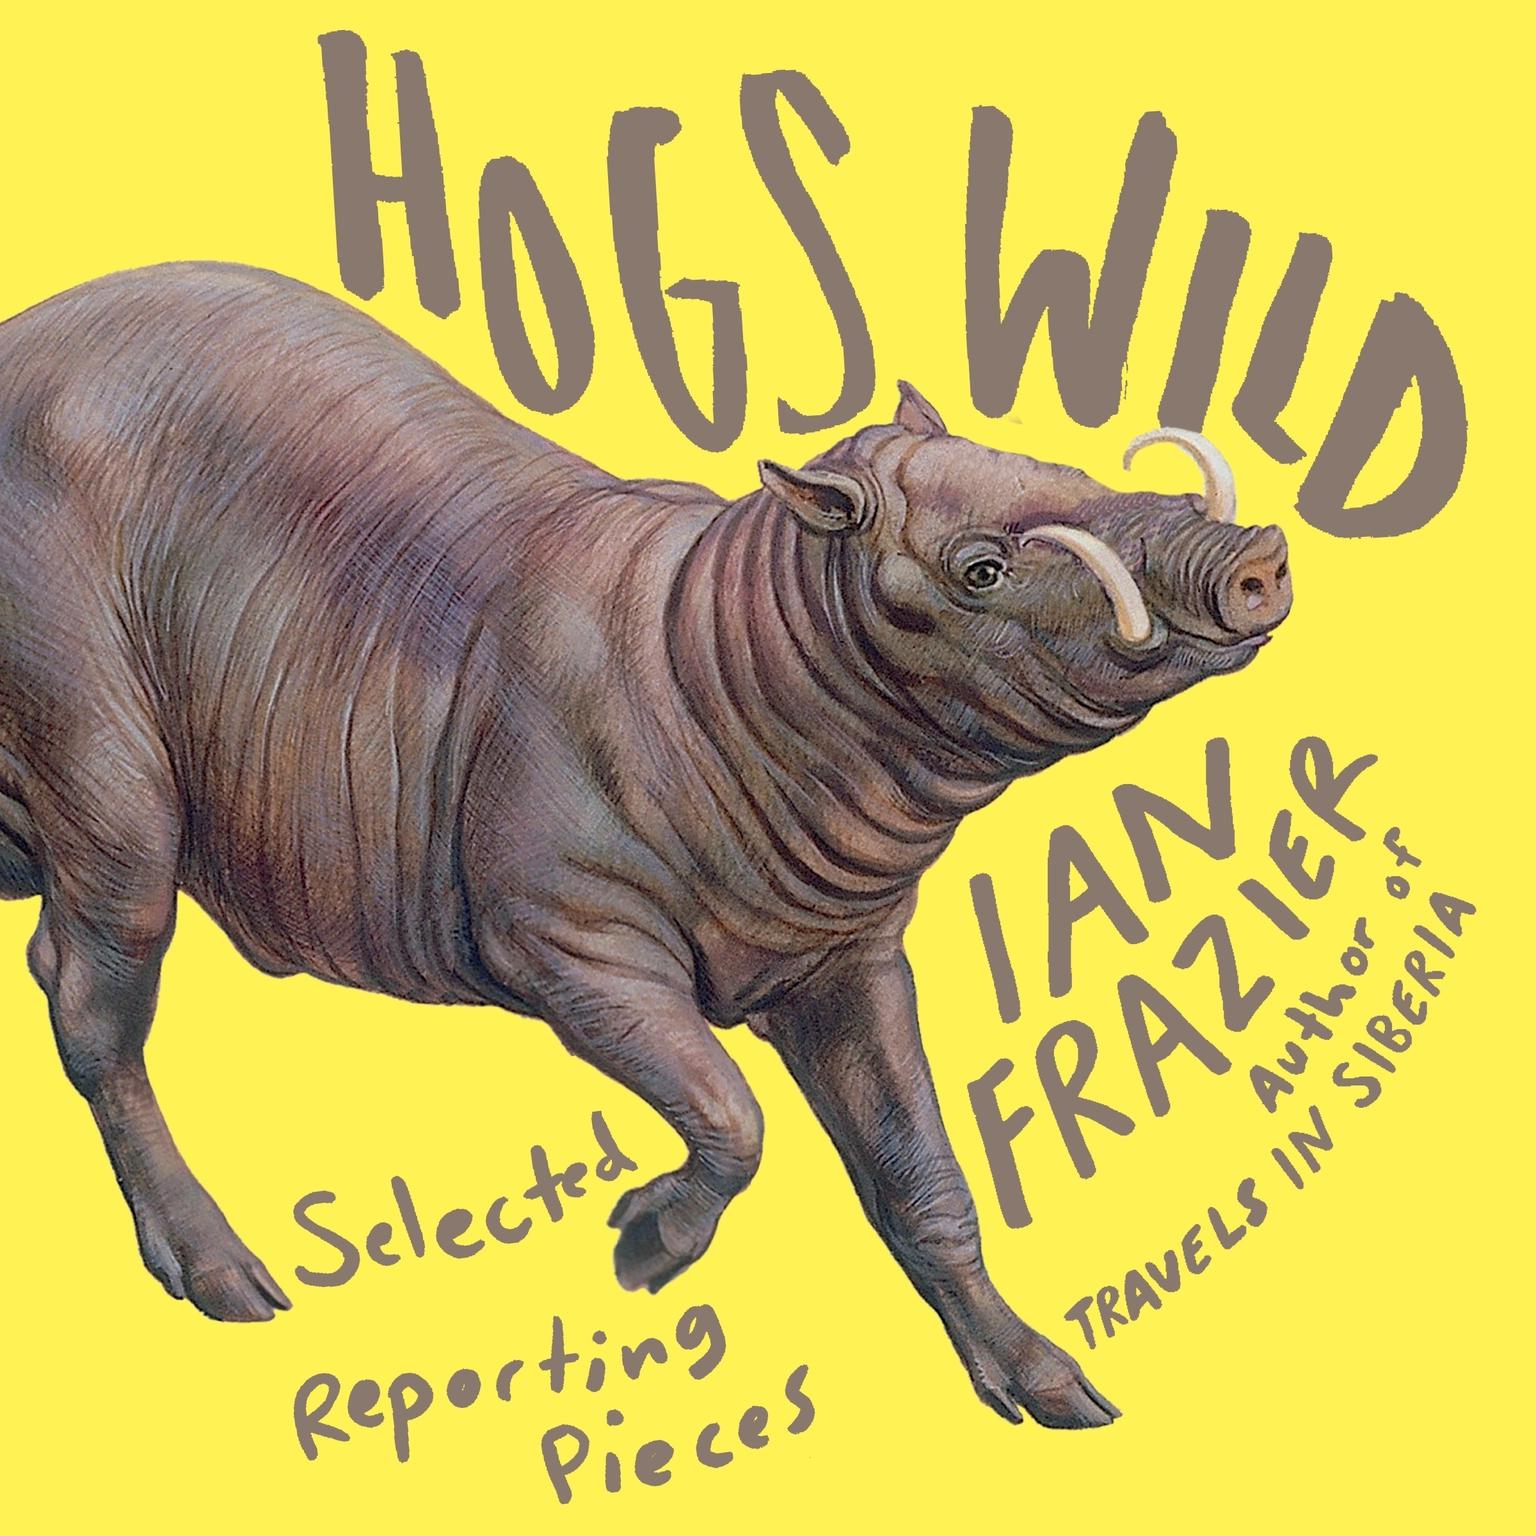 Hogs Wild: Selected Reporting Pieces Audiobook, by Ian Frazier